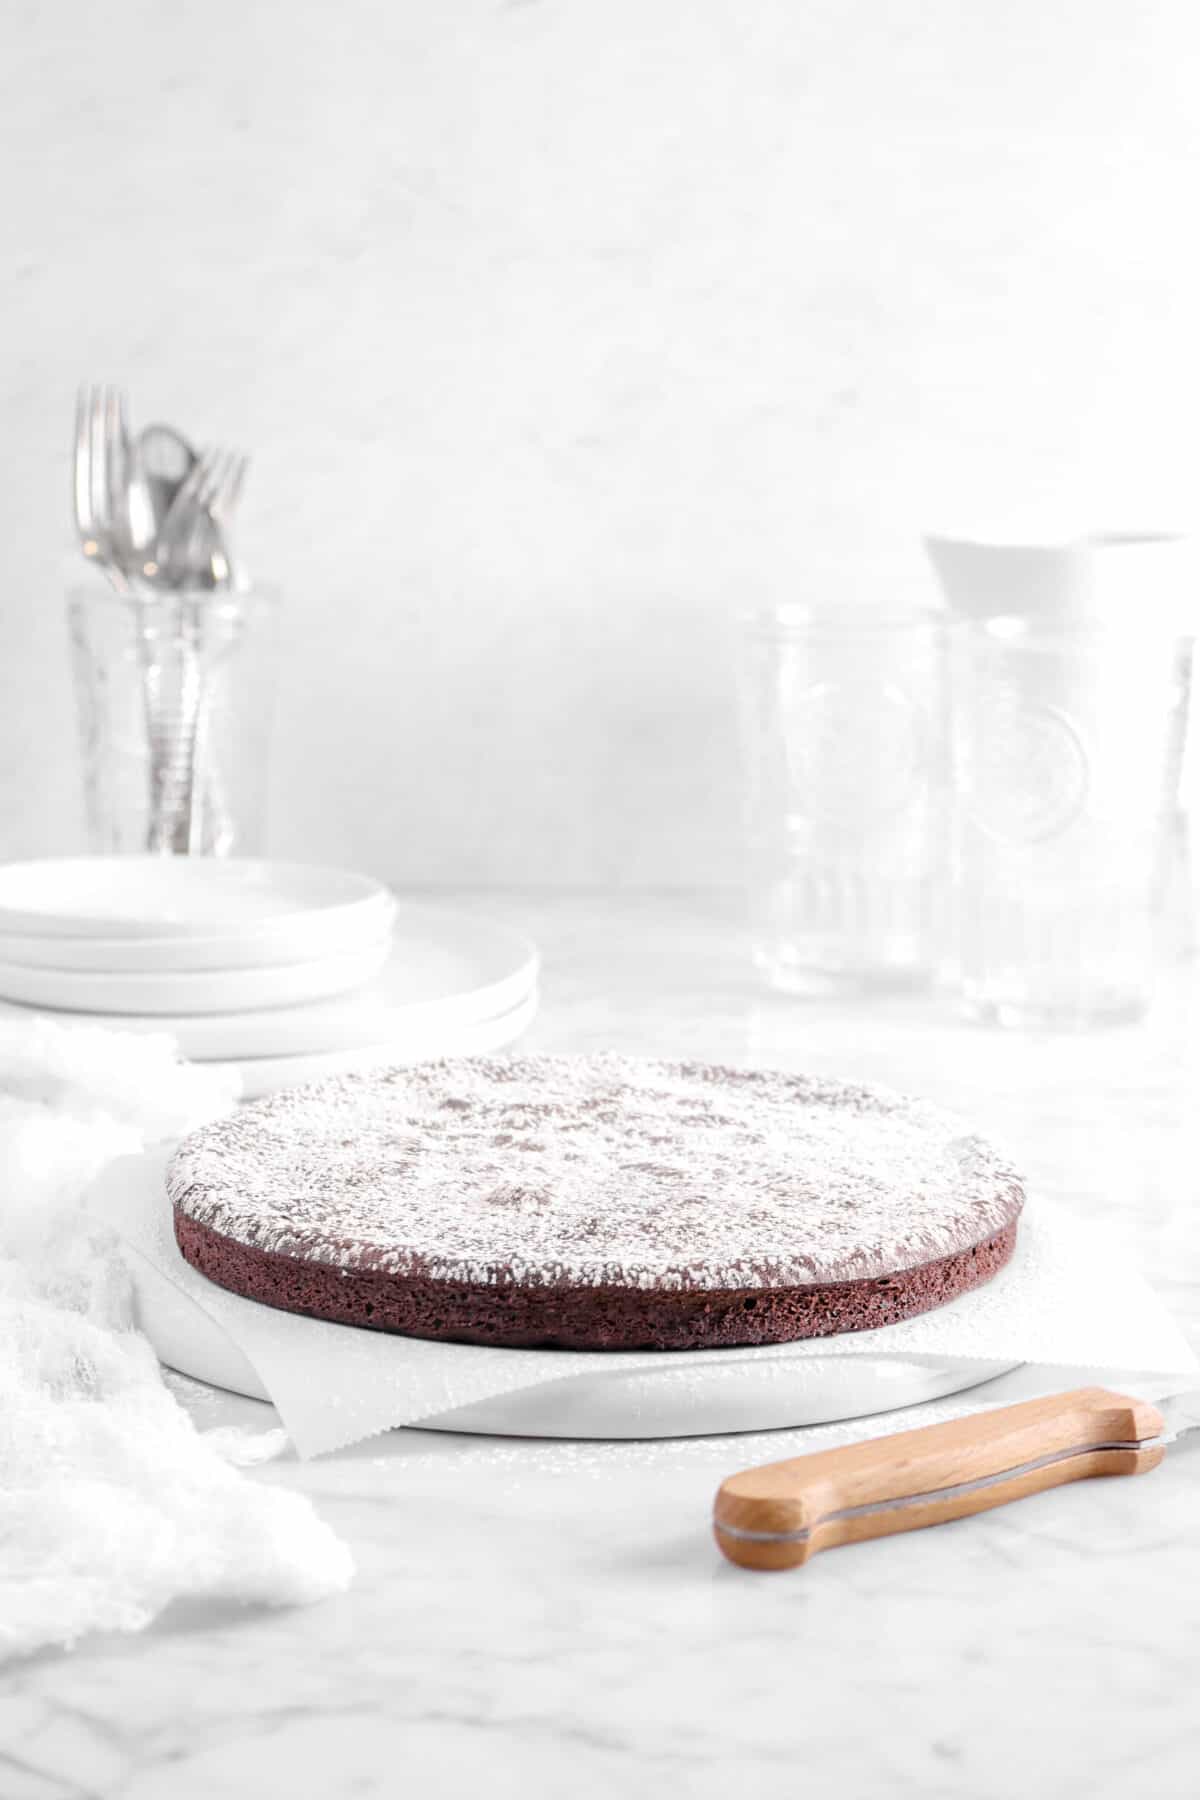 powdered sugar on top of cake with white cheese cloth, a knife, and two glasses